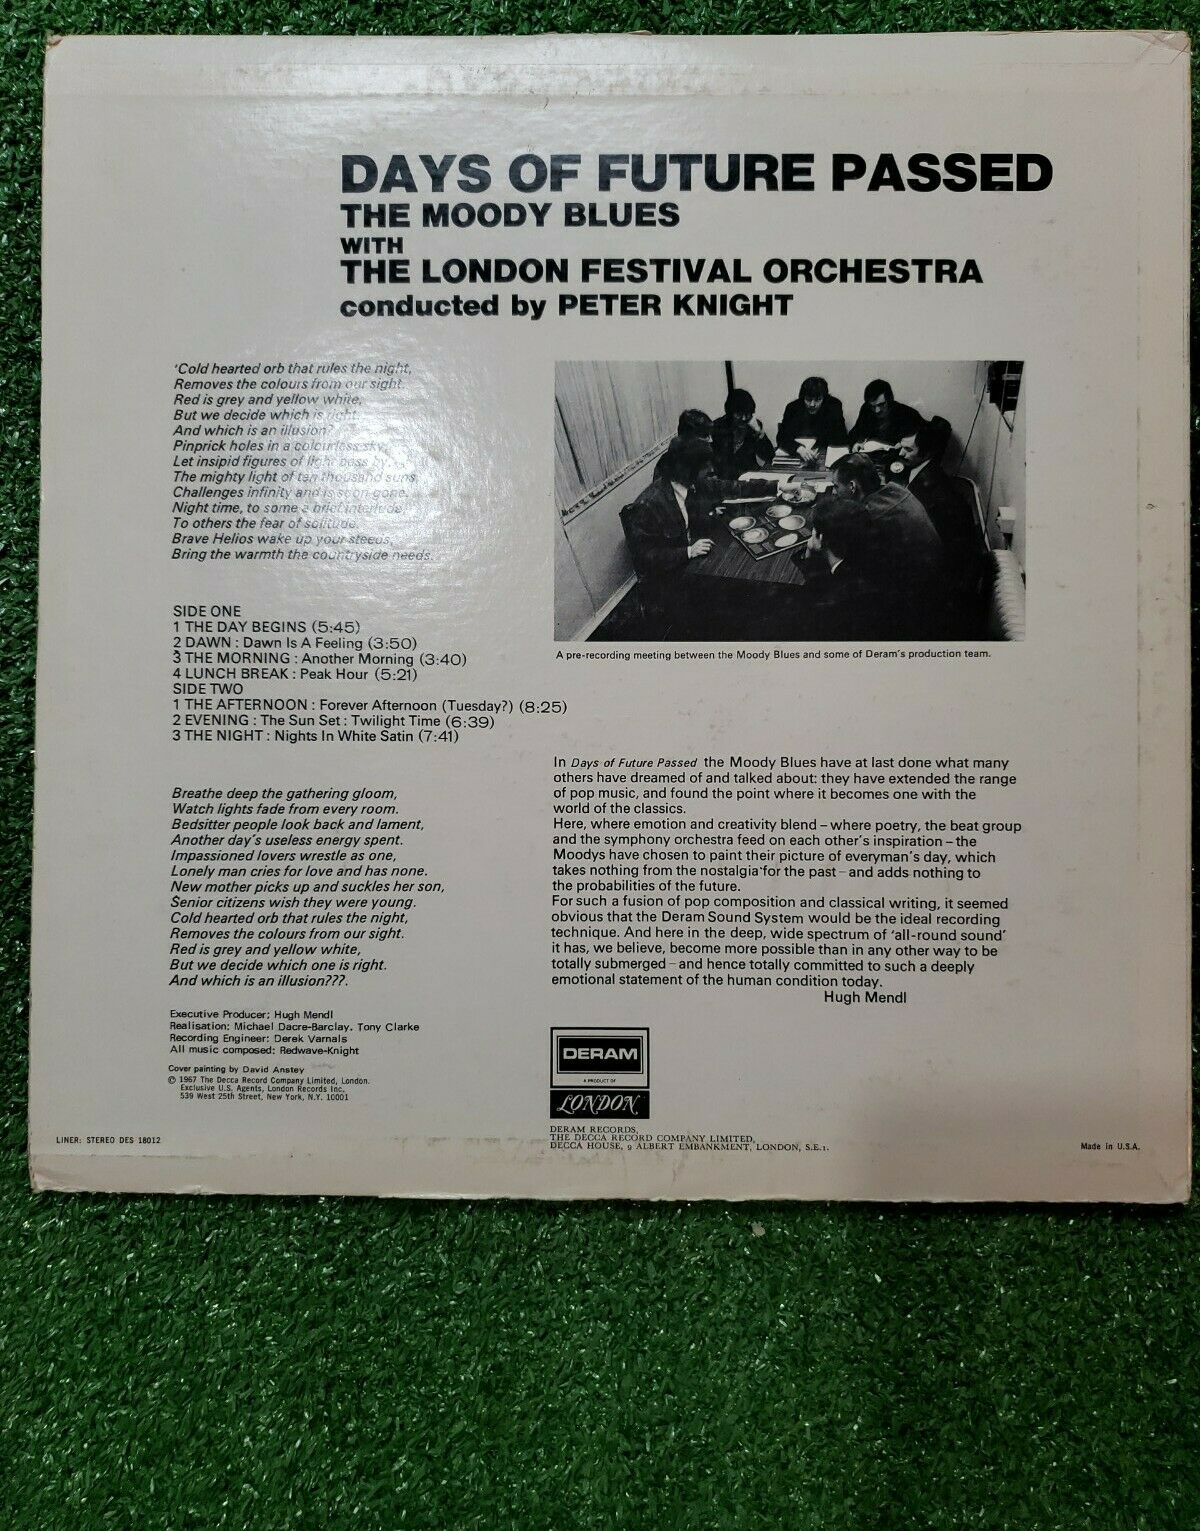 MOODY BLUES “DAYS OF FUTURE PASSED” ALL TIME CLASSIC | Void Vinyl Records